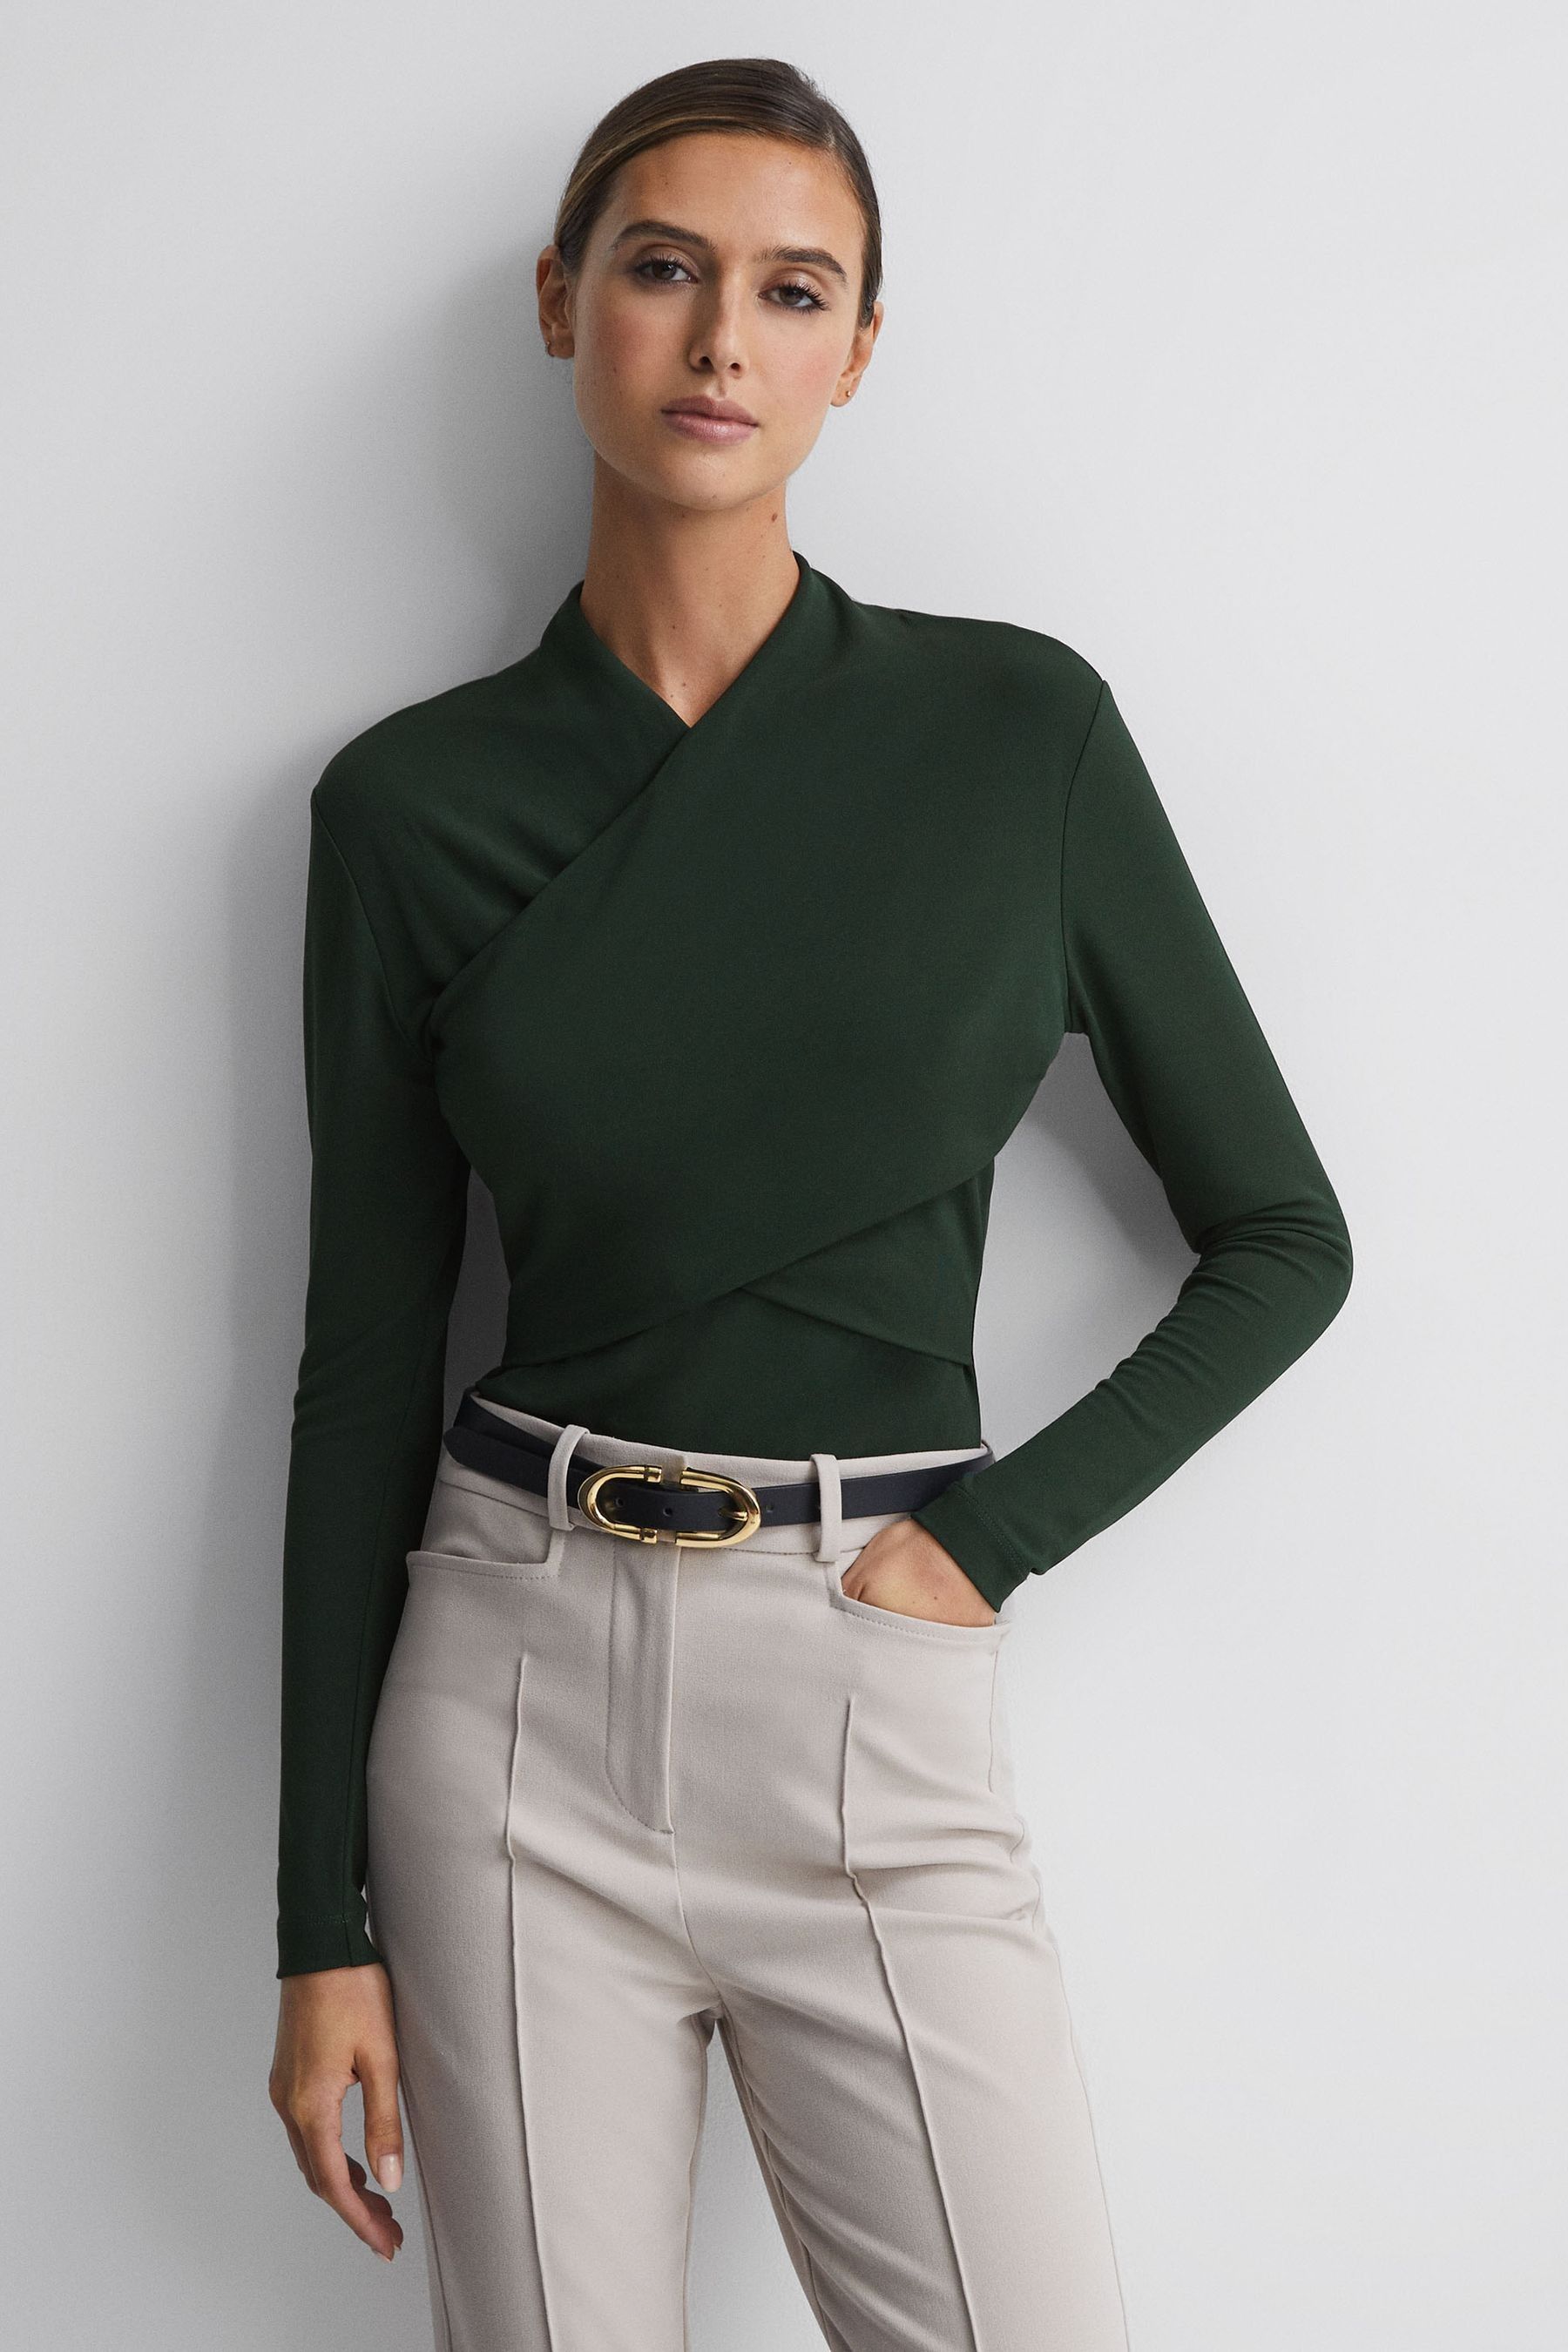 Reiss Ellie - Green Fitted Long Sleeve Wrap Top, L